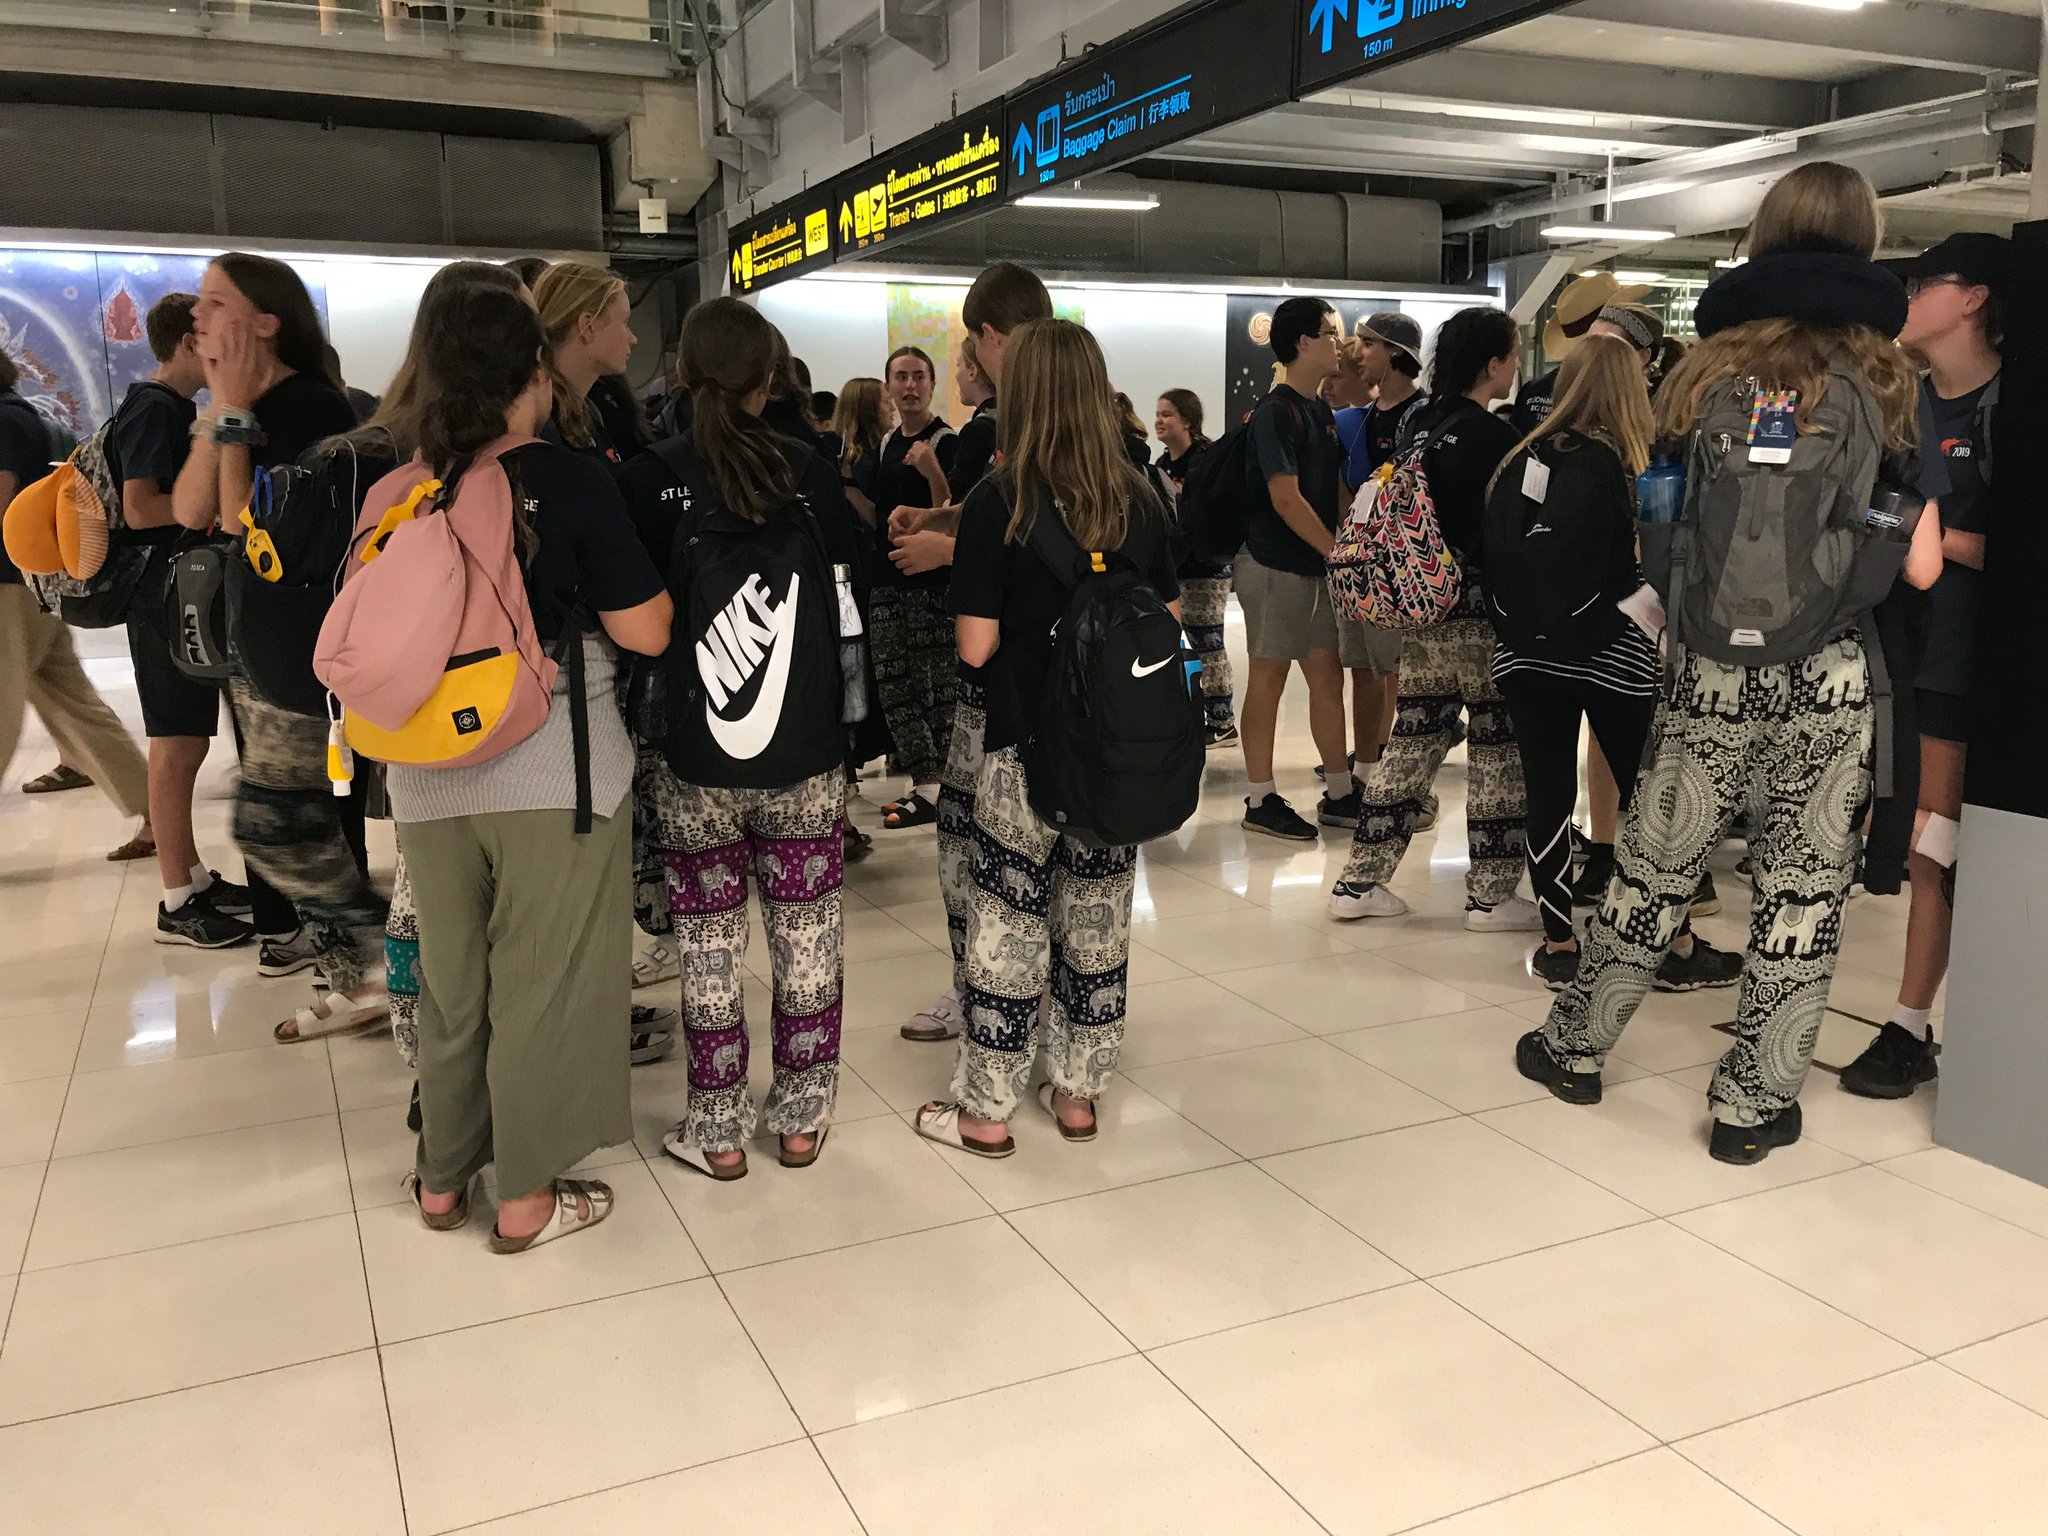 Chayut ໄຊຢຸດ on X: An unscientific approach of measuring tourism in  #Thailand is the Elephant Pants Index. Mostly bought and worn by first-time  visitors to the kingdom. 🐘So more pants, more arrivals.